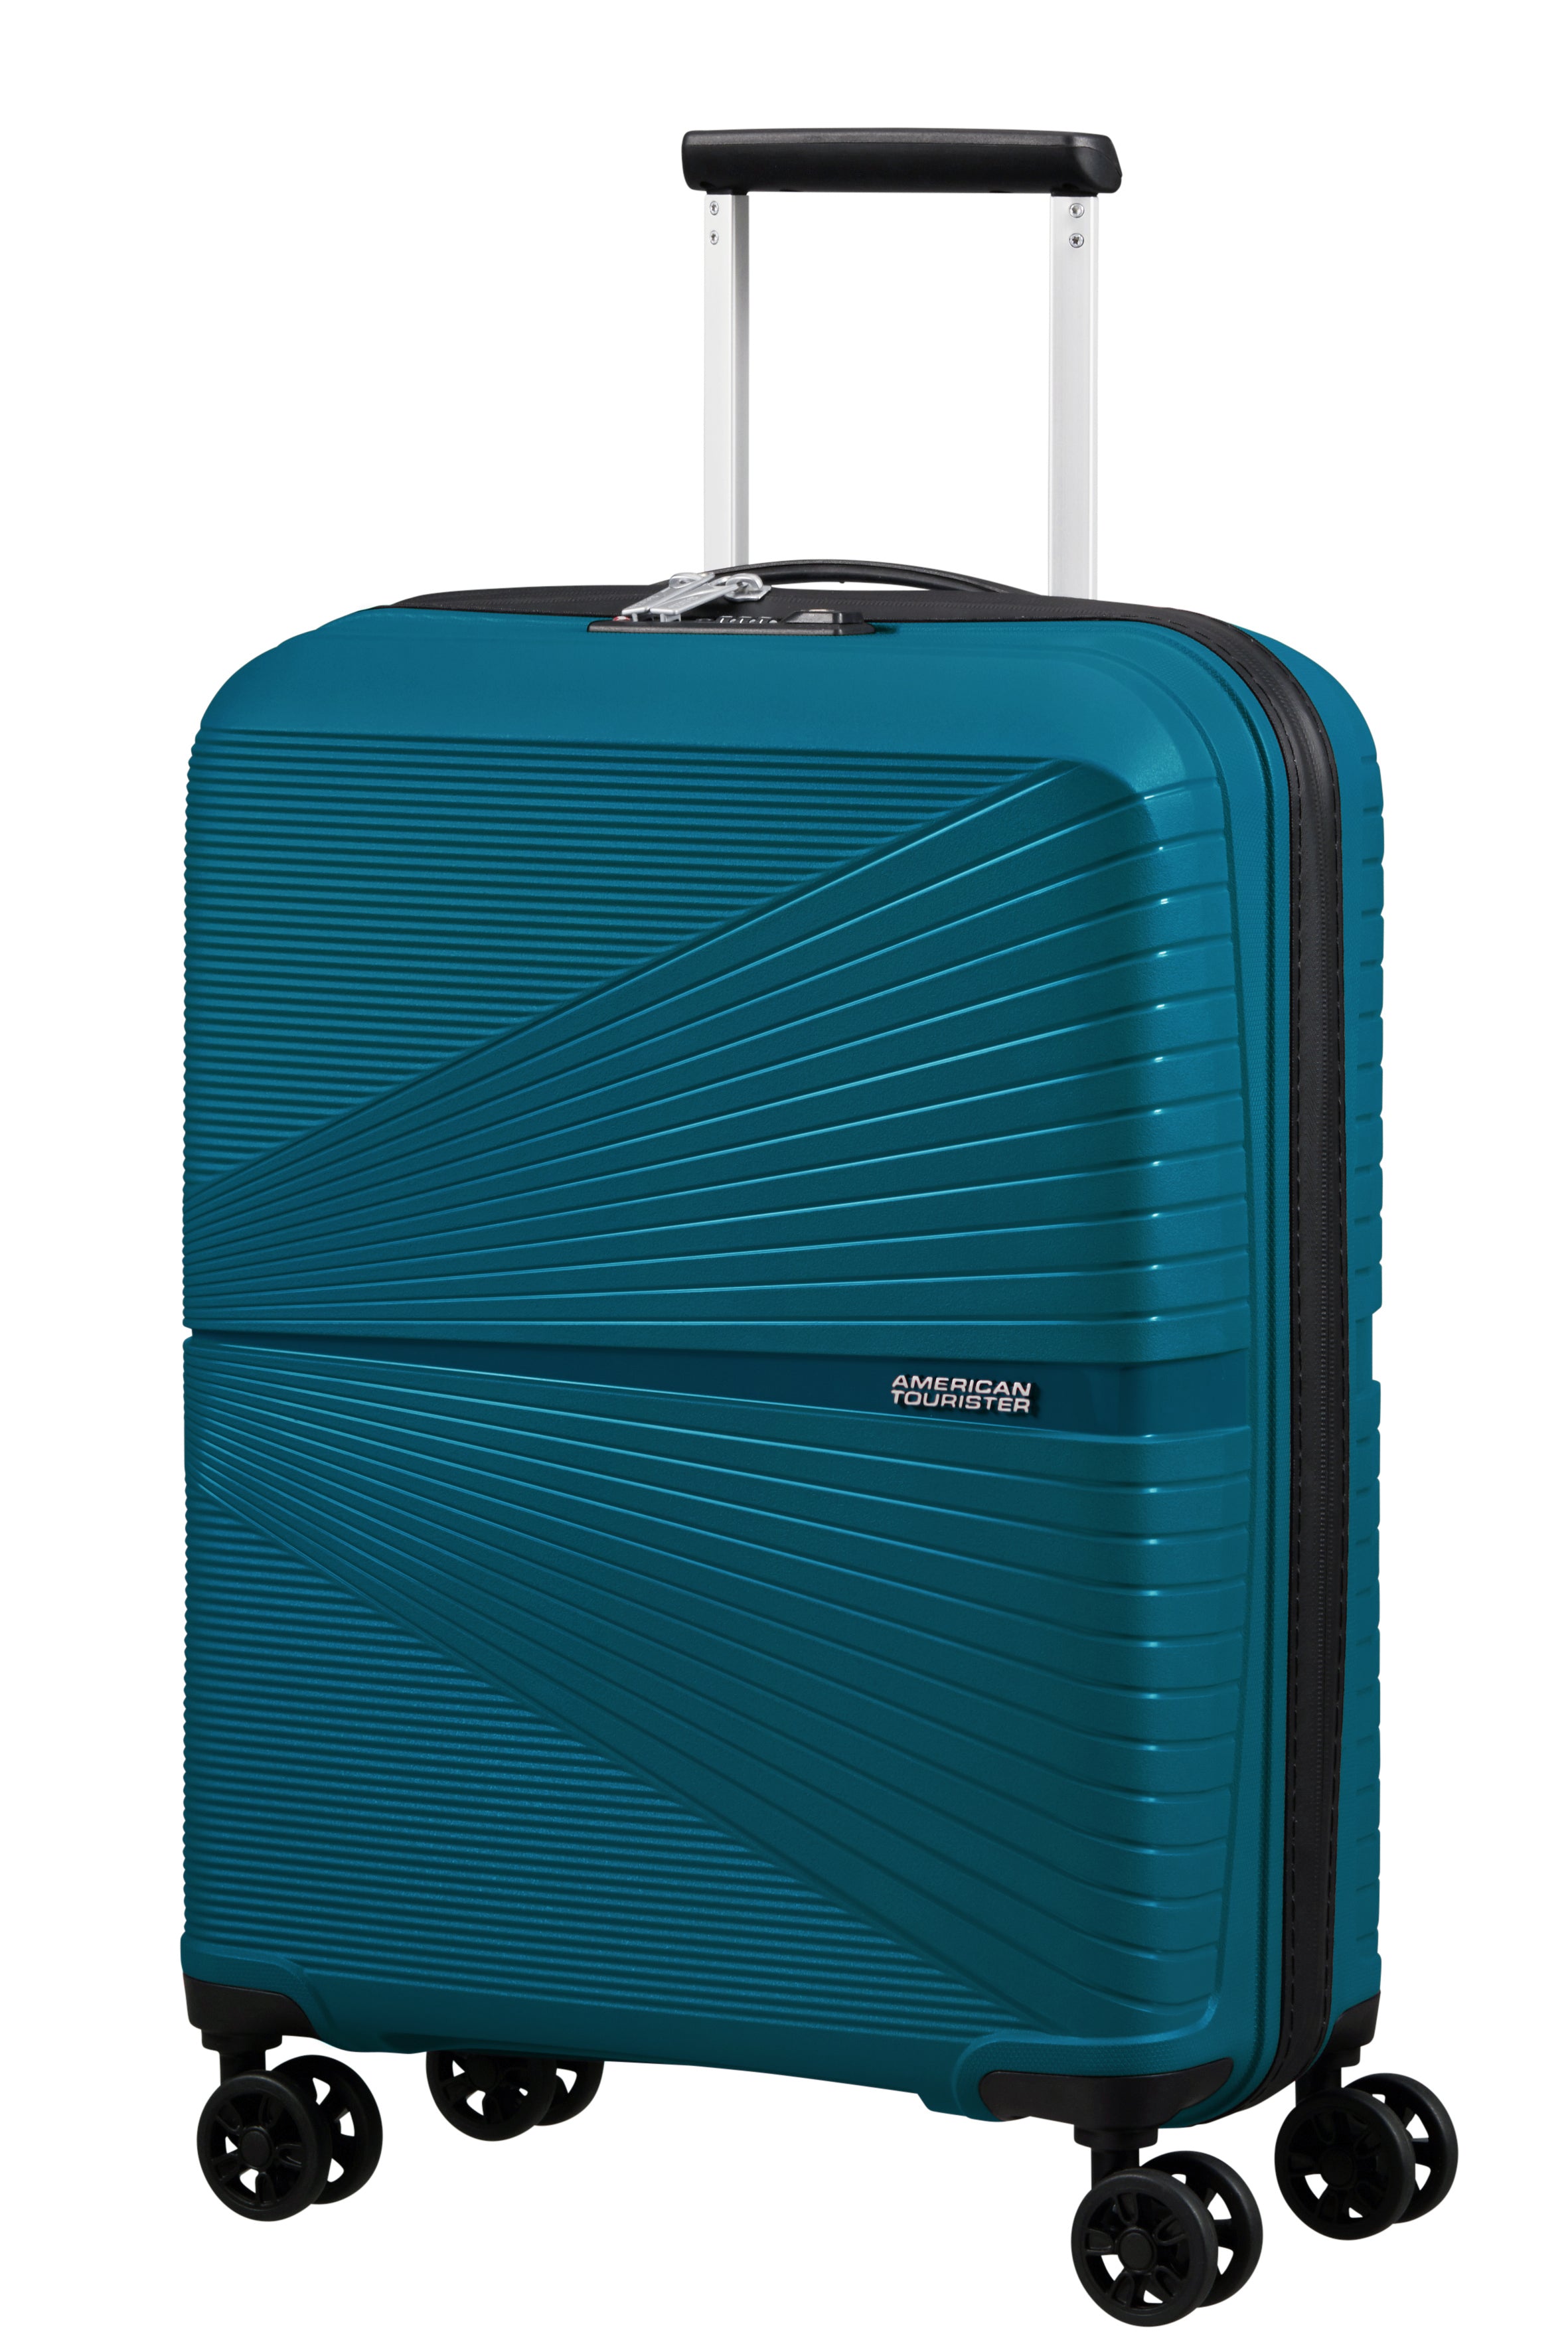 American Tourister - Airconic 55cm Small Suitcase - Deep Ocean-1